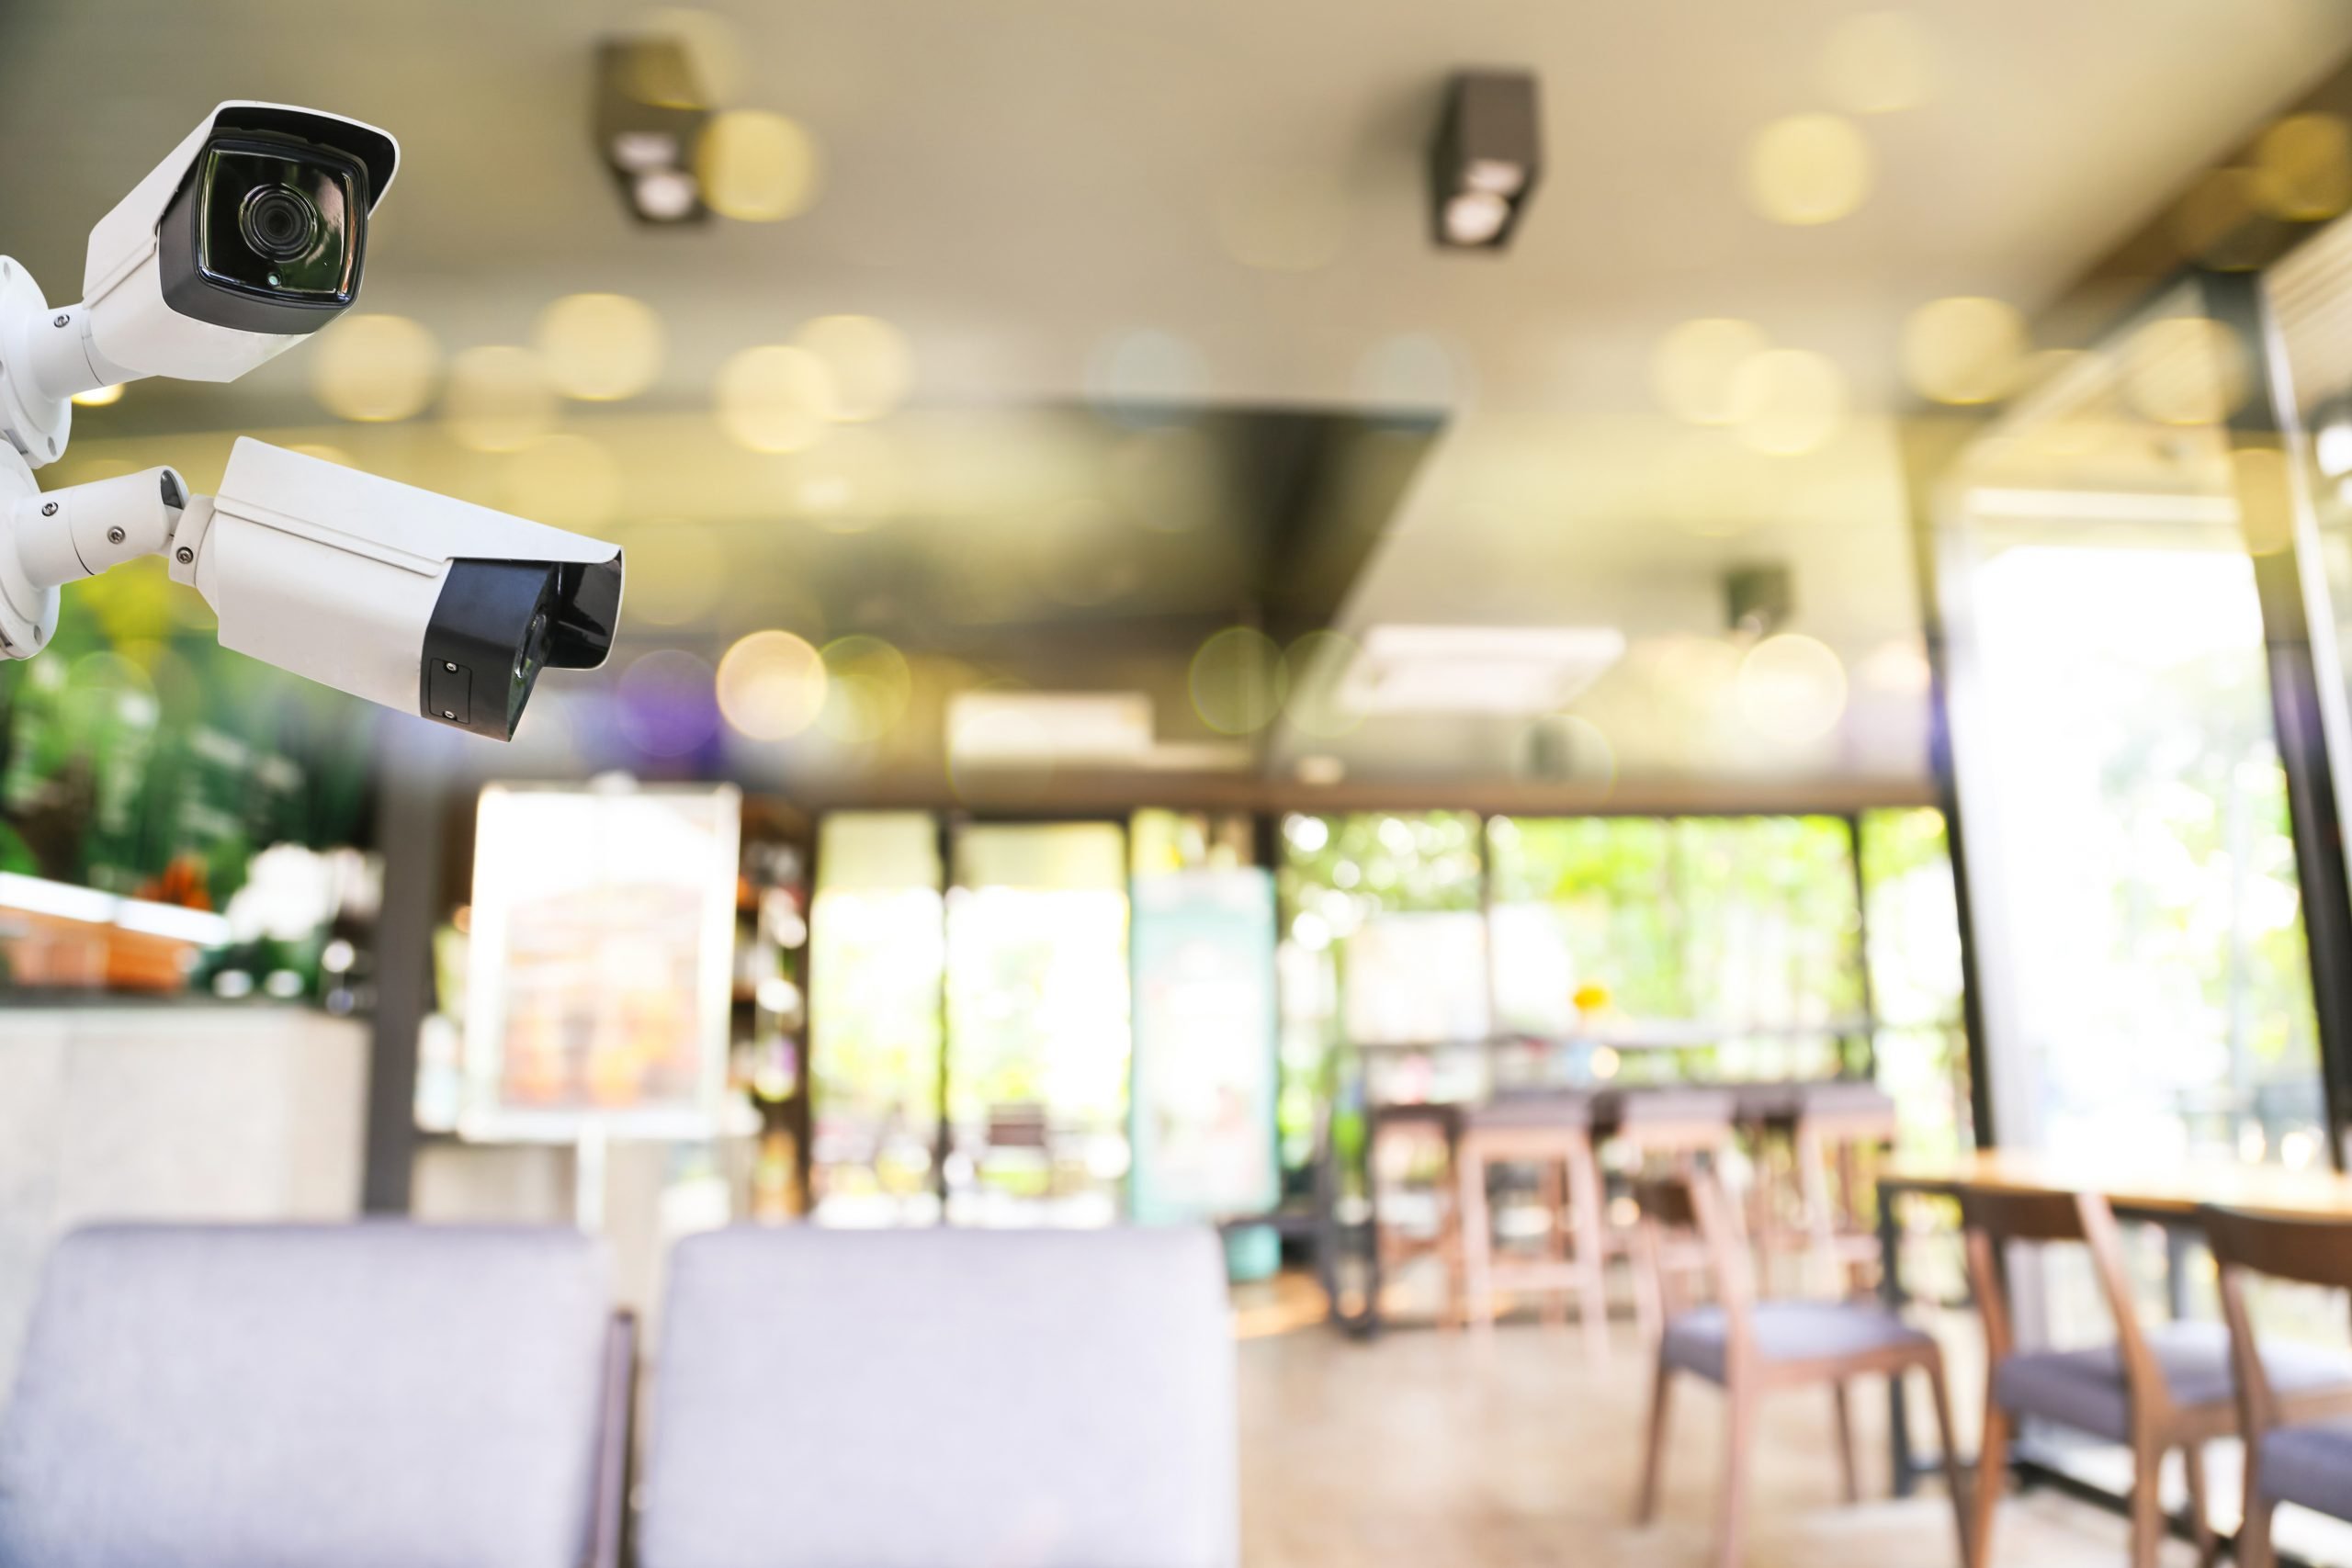 Choosing a Surveillance System for your Business